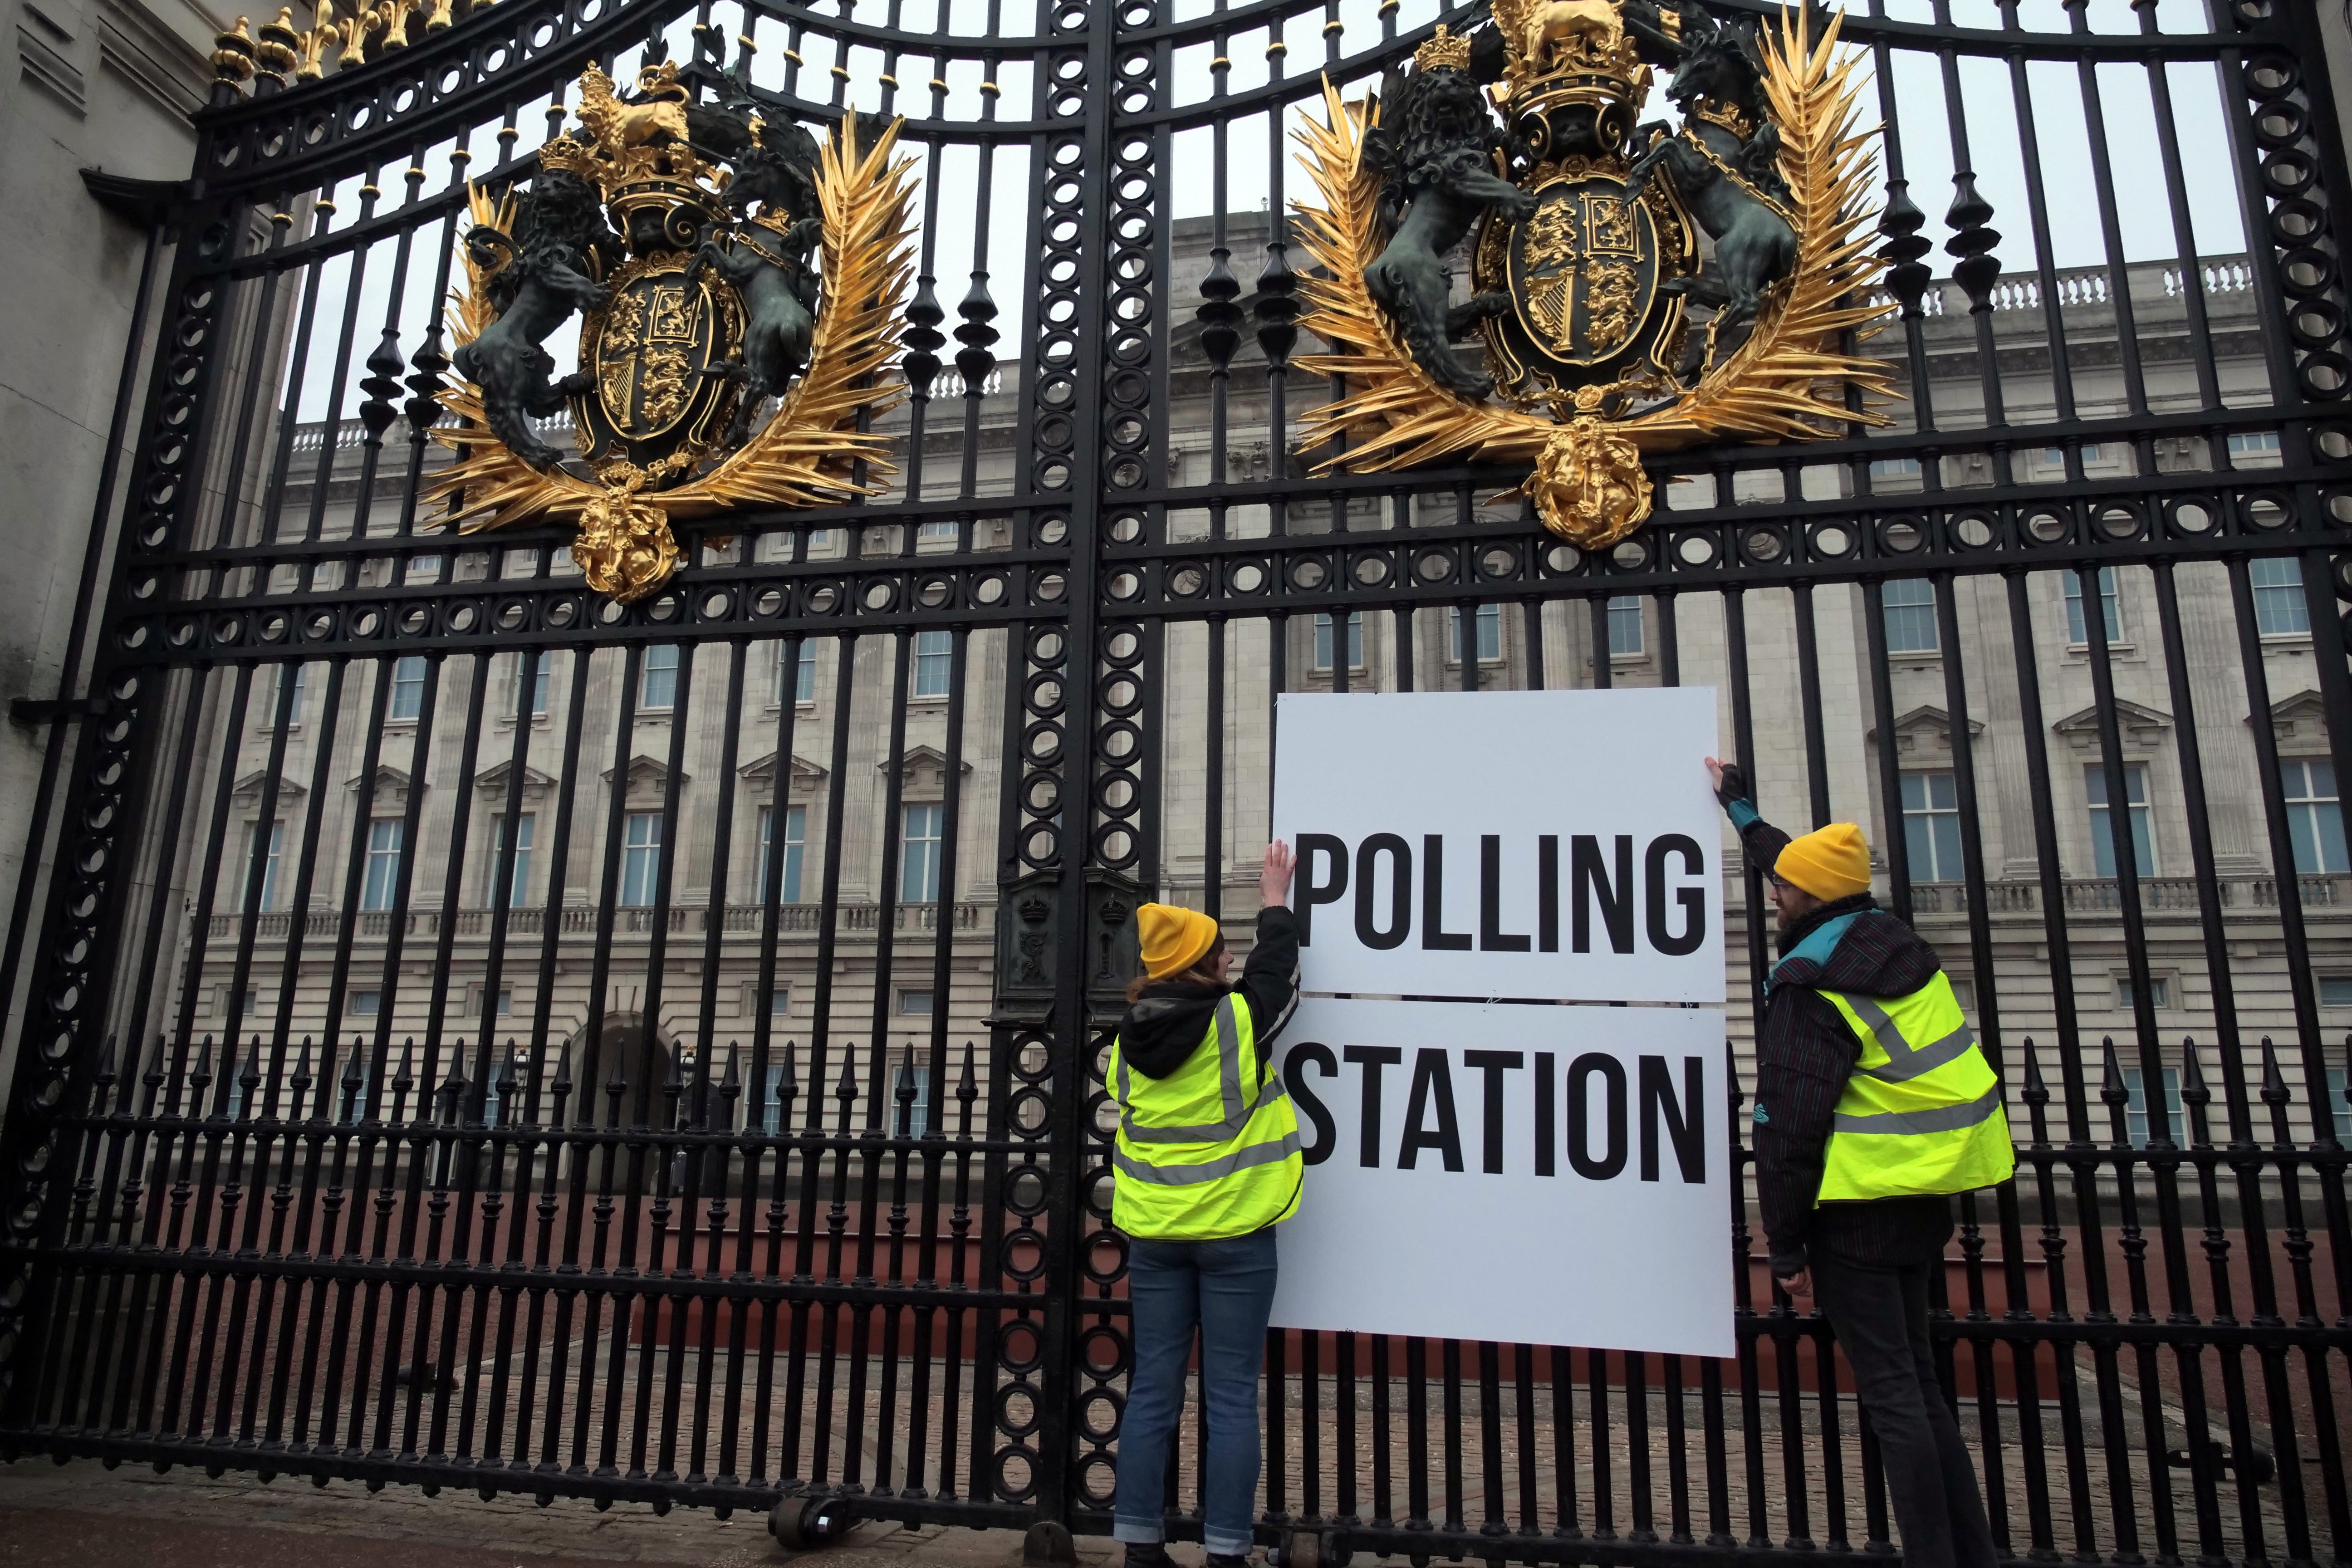 Activists from Republic put a polling station sign on the gates of Buckingham Palace.